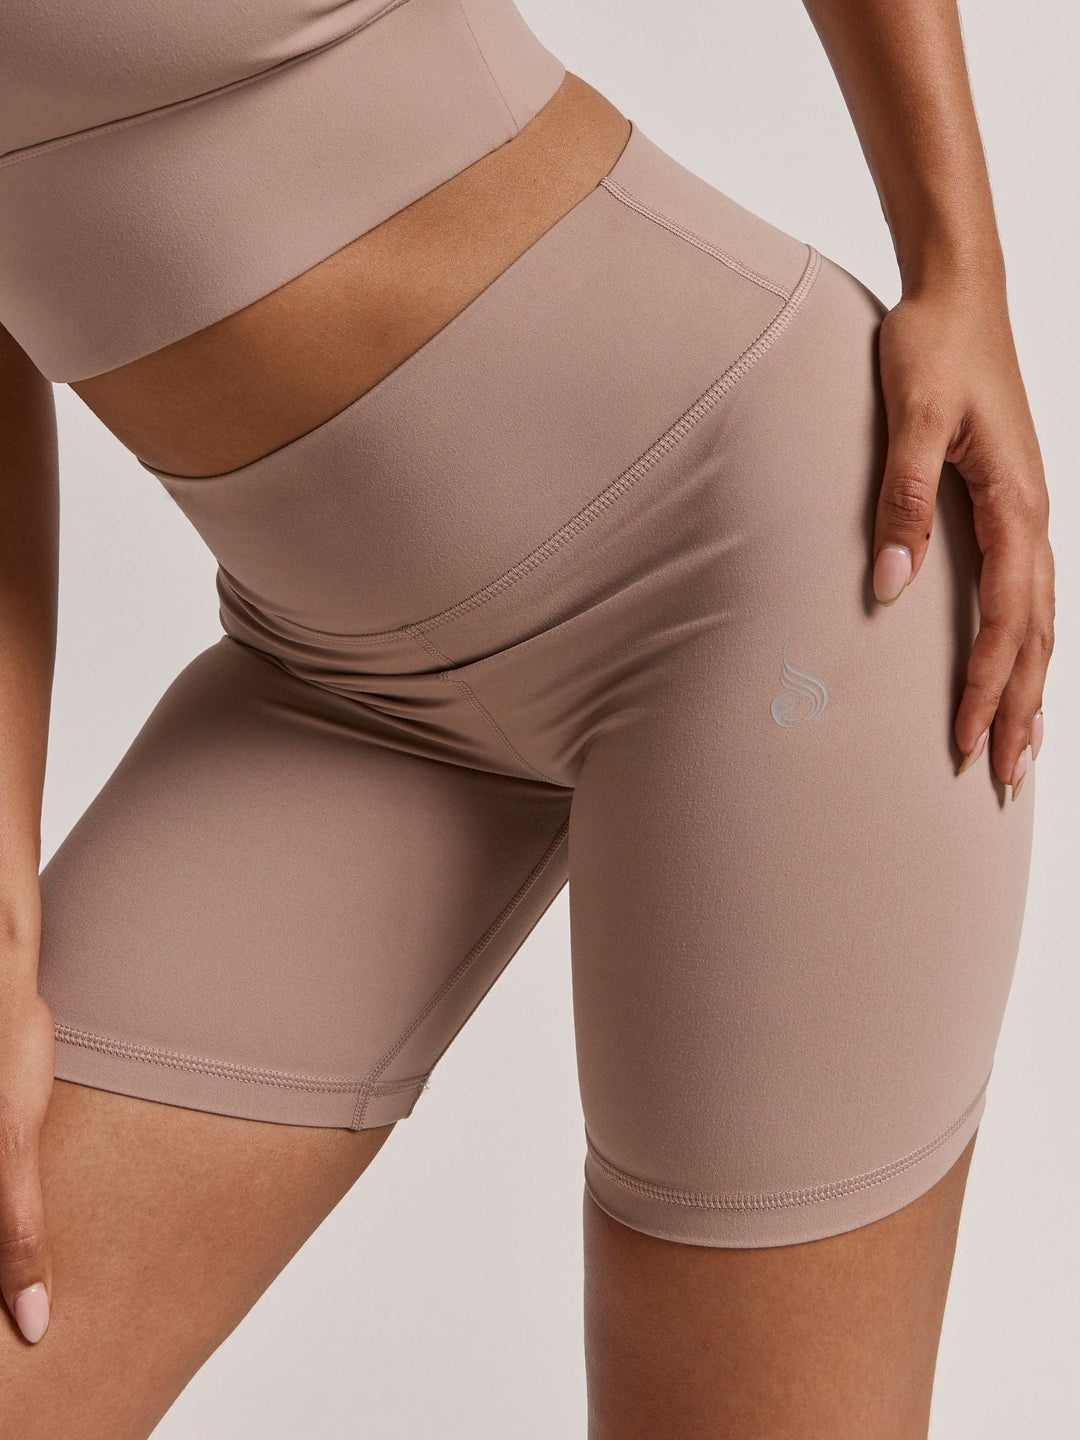 NKD Arch Mid-Length Shorts - Taupe Clothing Ryderwear 